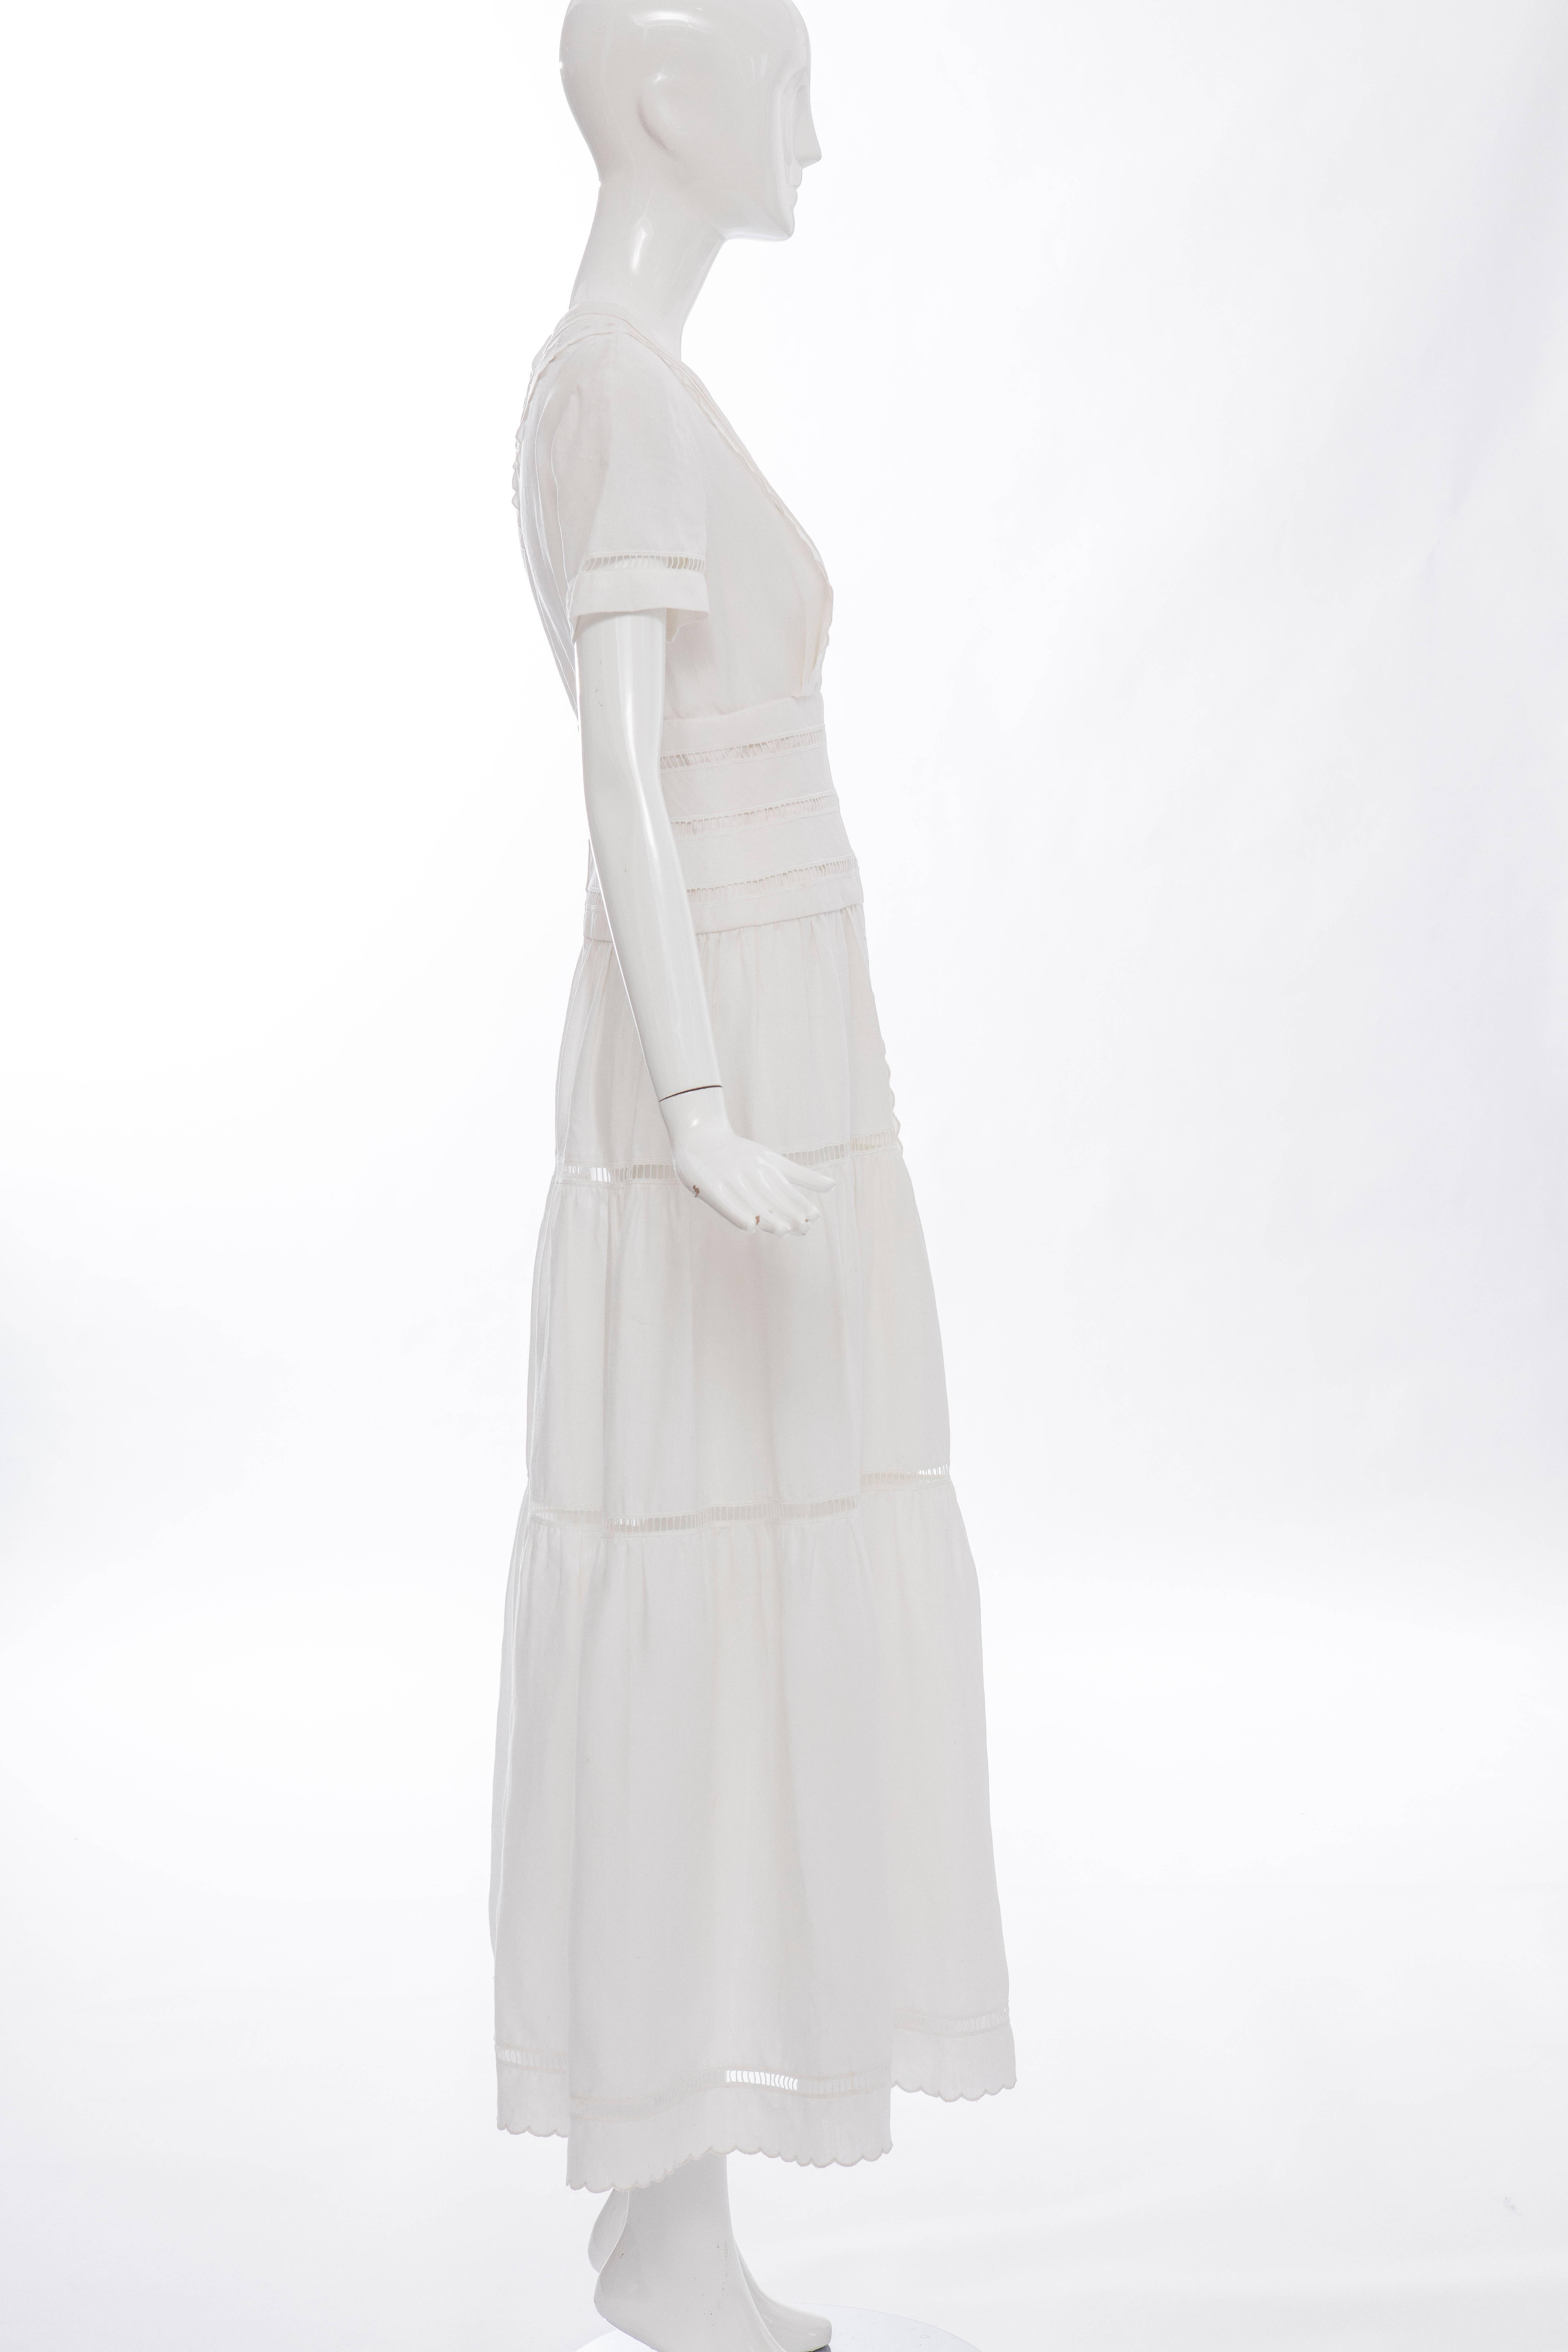 Gray Chanel Short Sleeve Whitework Embroidered Linen Dress, Circa 1980's